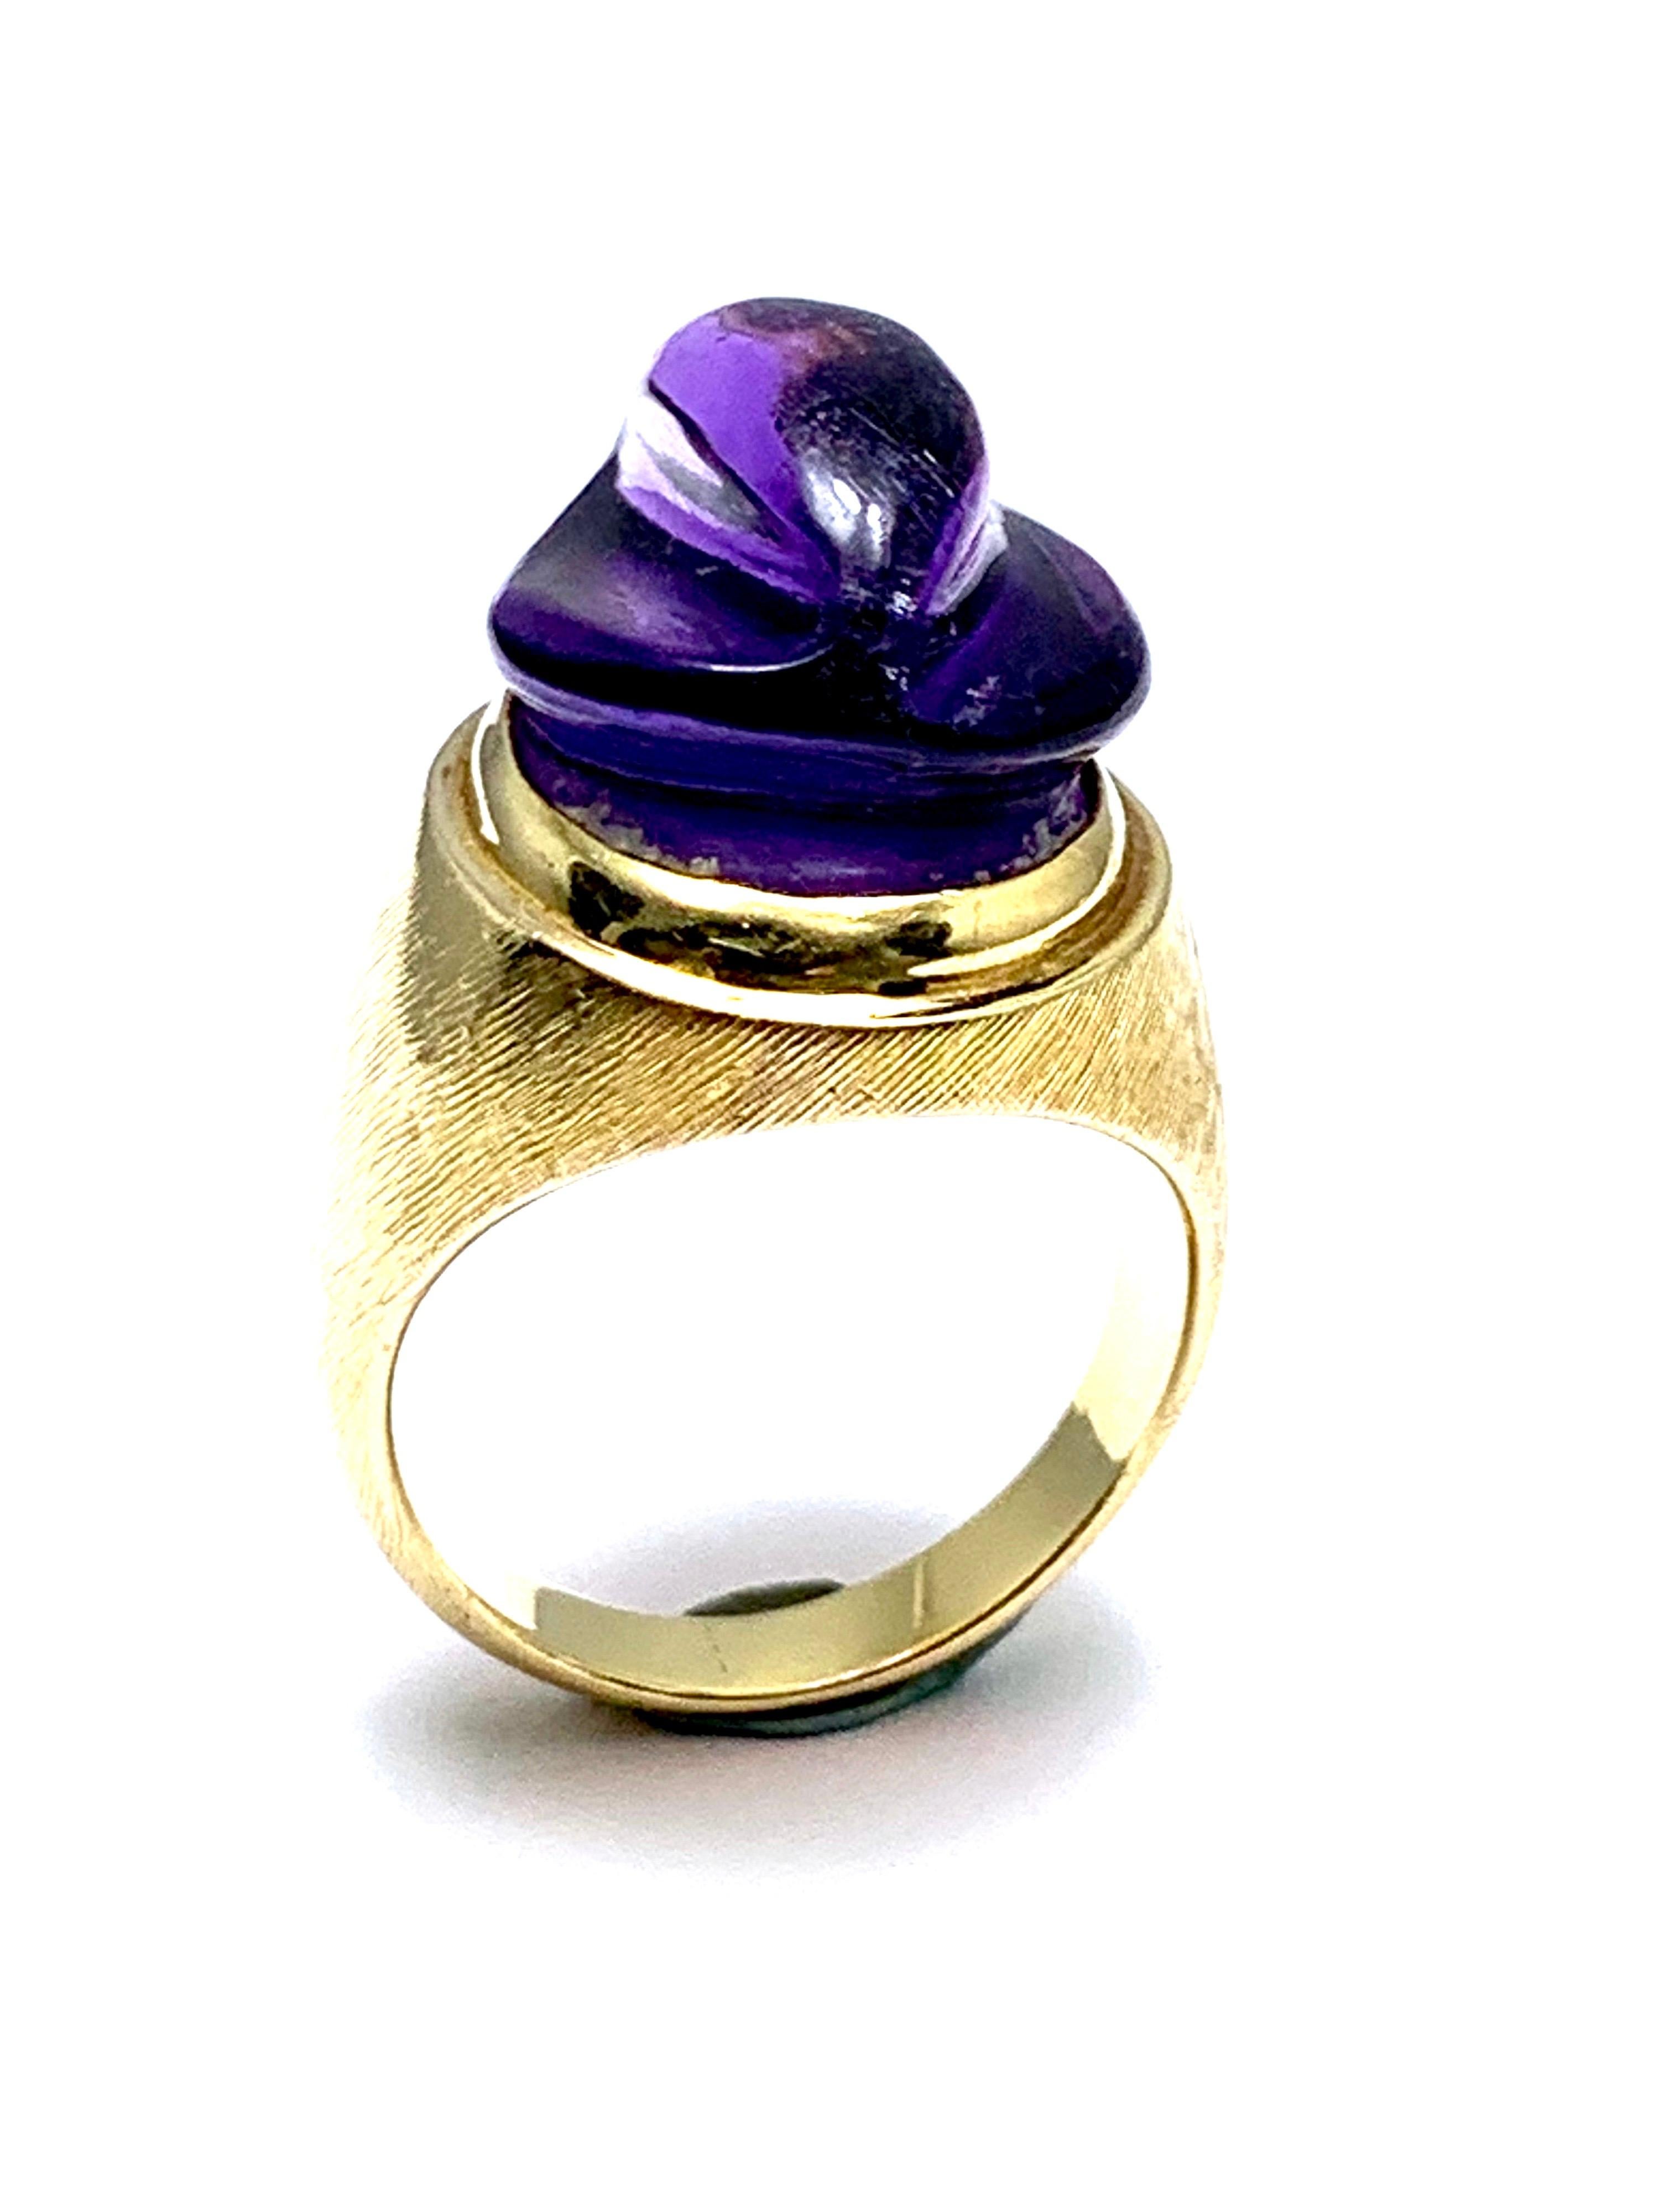 A gorgeous Amethyst Forma Livre ring designed by Burle Marx. The 11.38 carat custom cut Aquamarine displays a rich purple hue, bezel set in an 18 karat yellow gold abstarct design ring. The inside shank is signed 